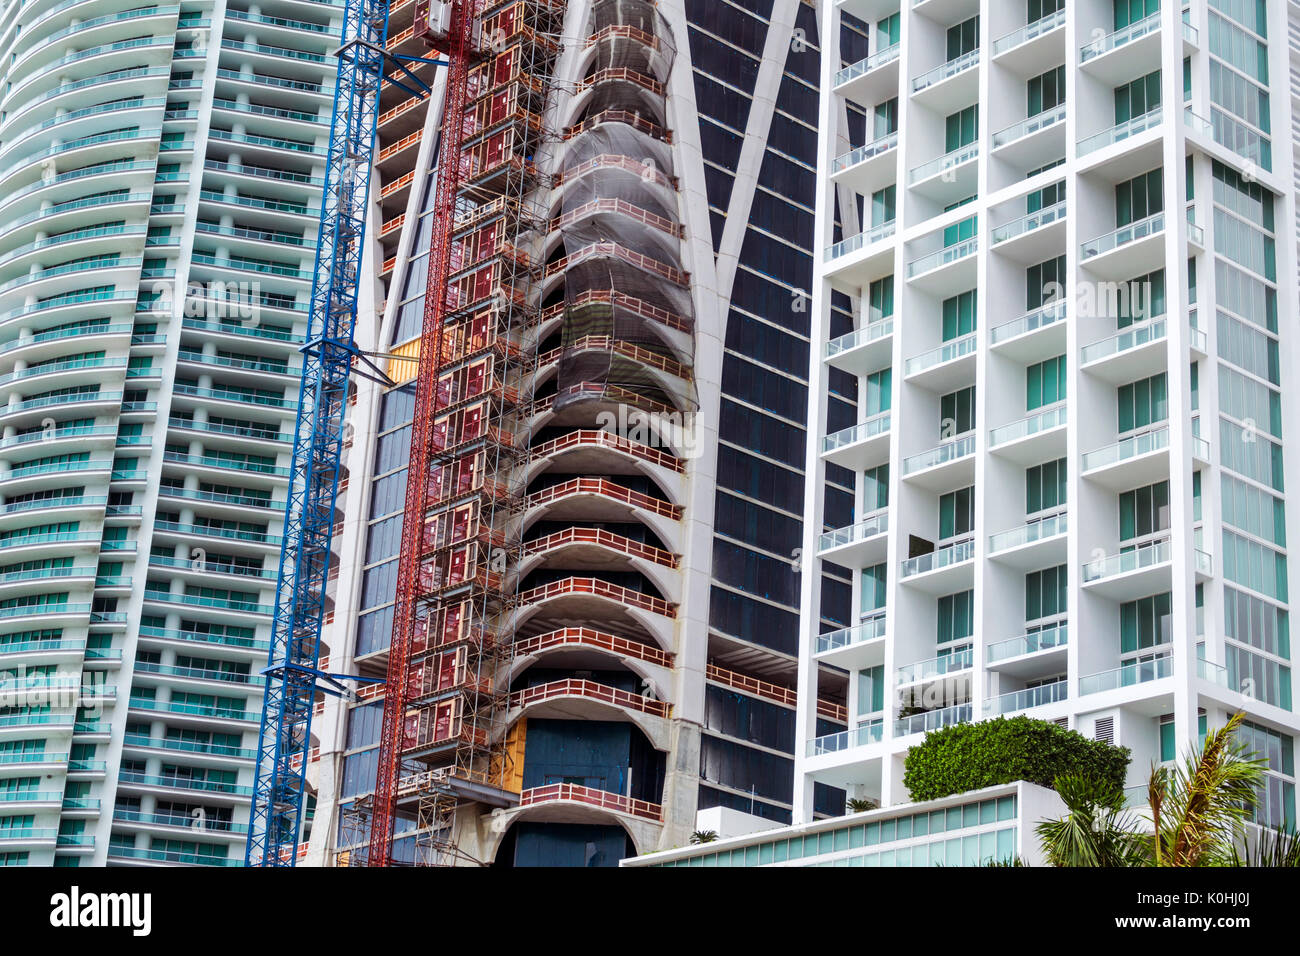 Miami Florida,Biscayne Boulevard,skyscrapers,under new construction site building builder,buildings,high rise condominiums,One Thousand Museum,Zaha Ha Stock Photo